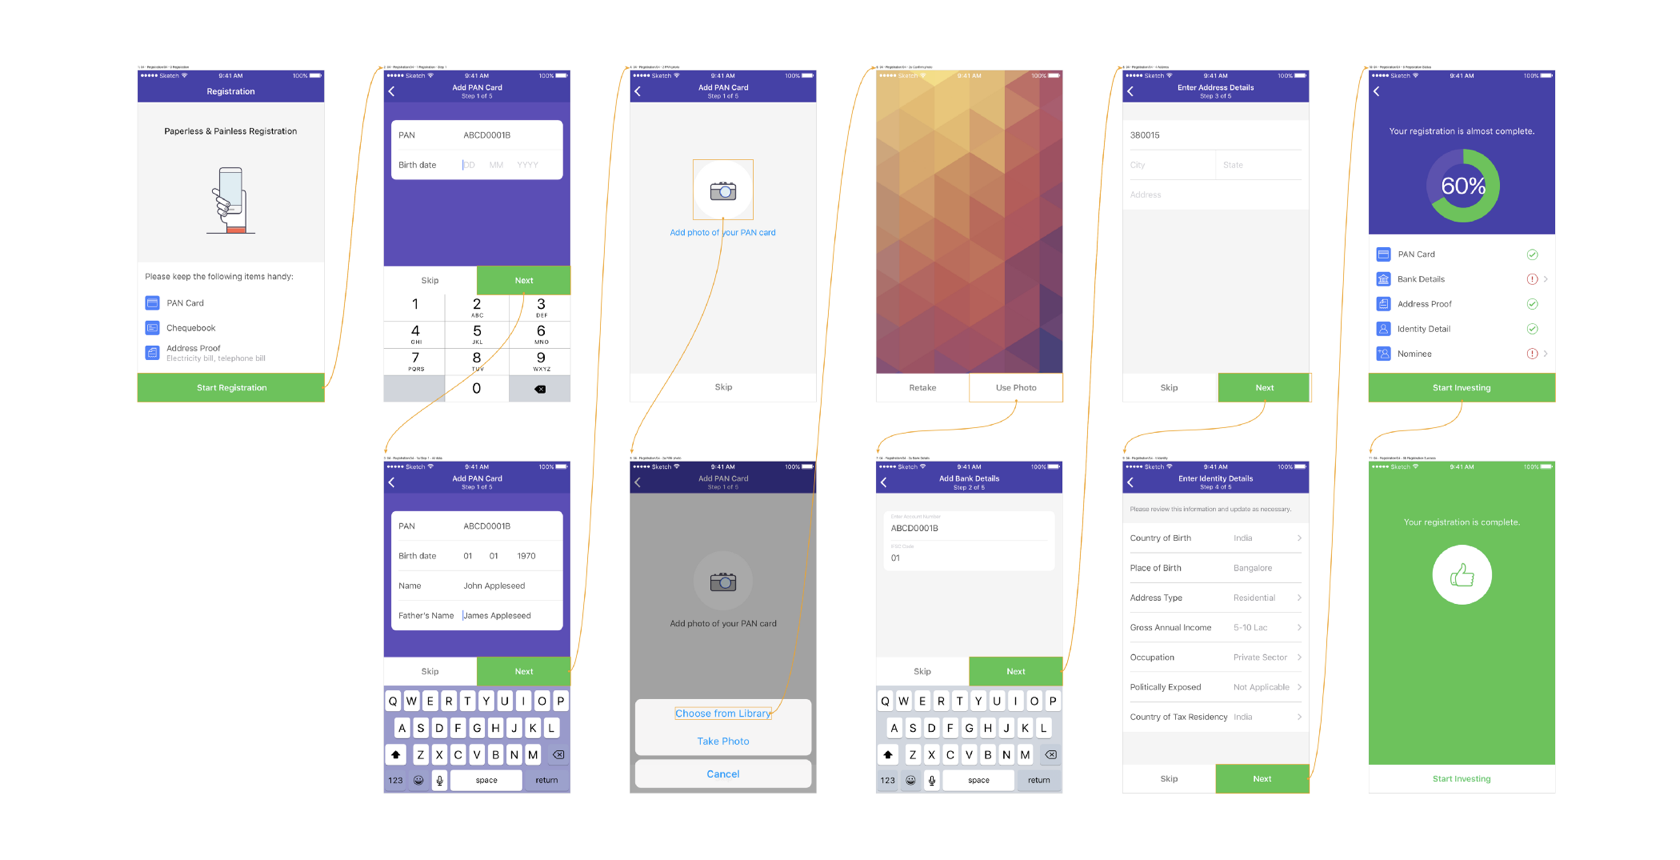 Best practices for financial app design involve breaking down complex features